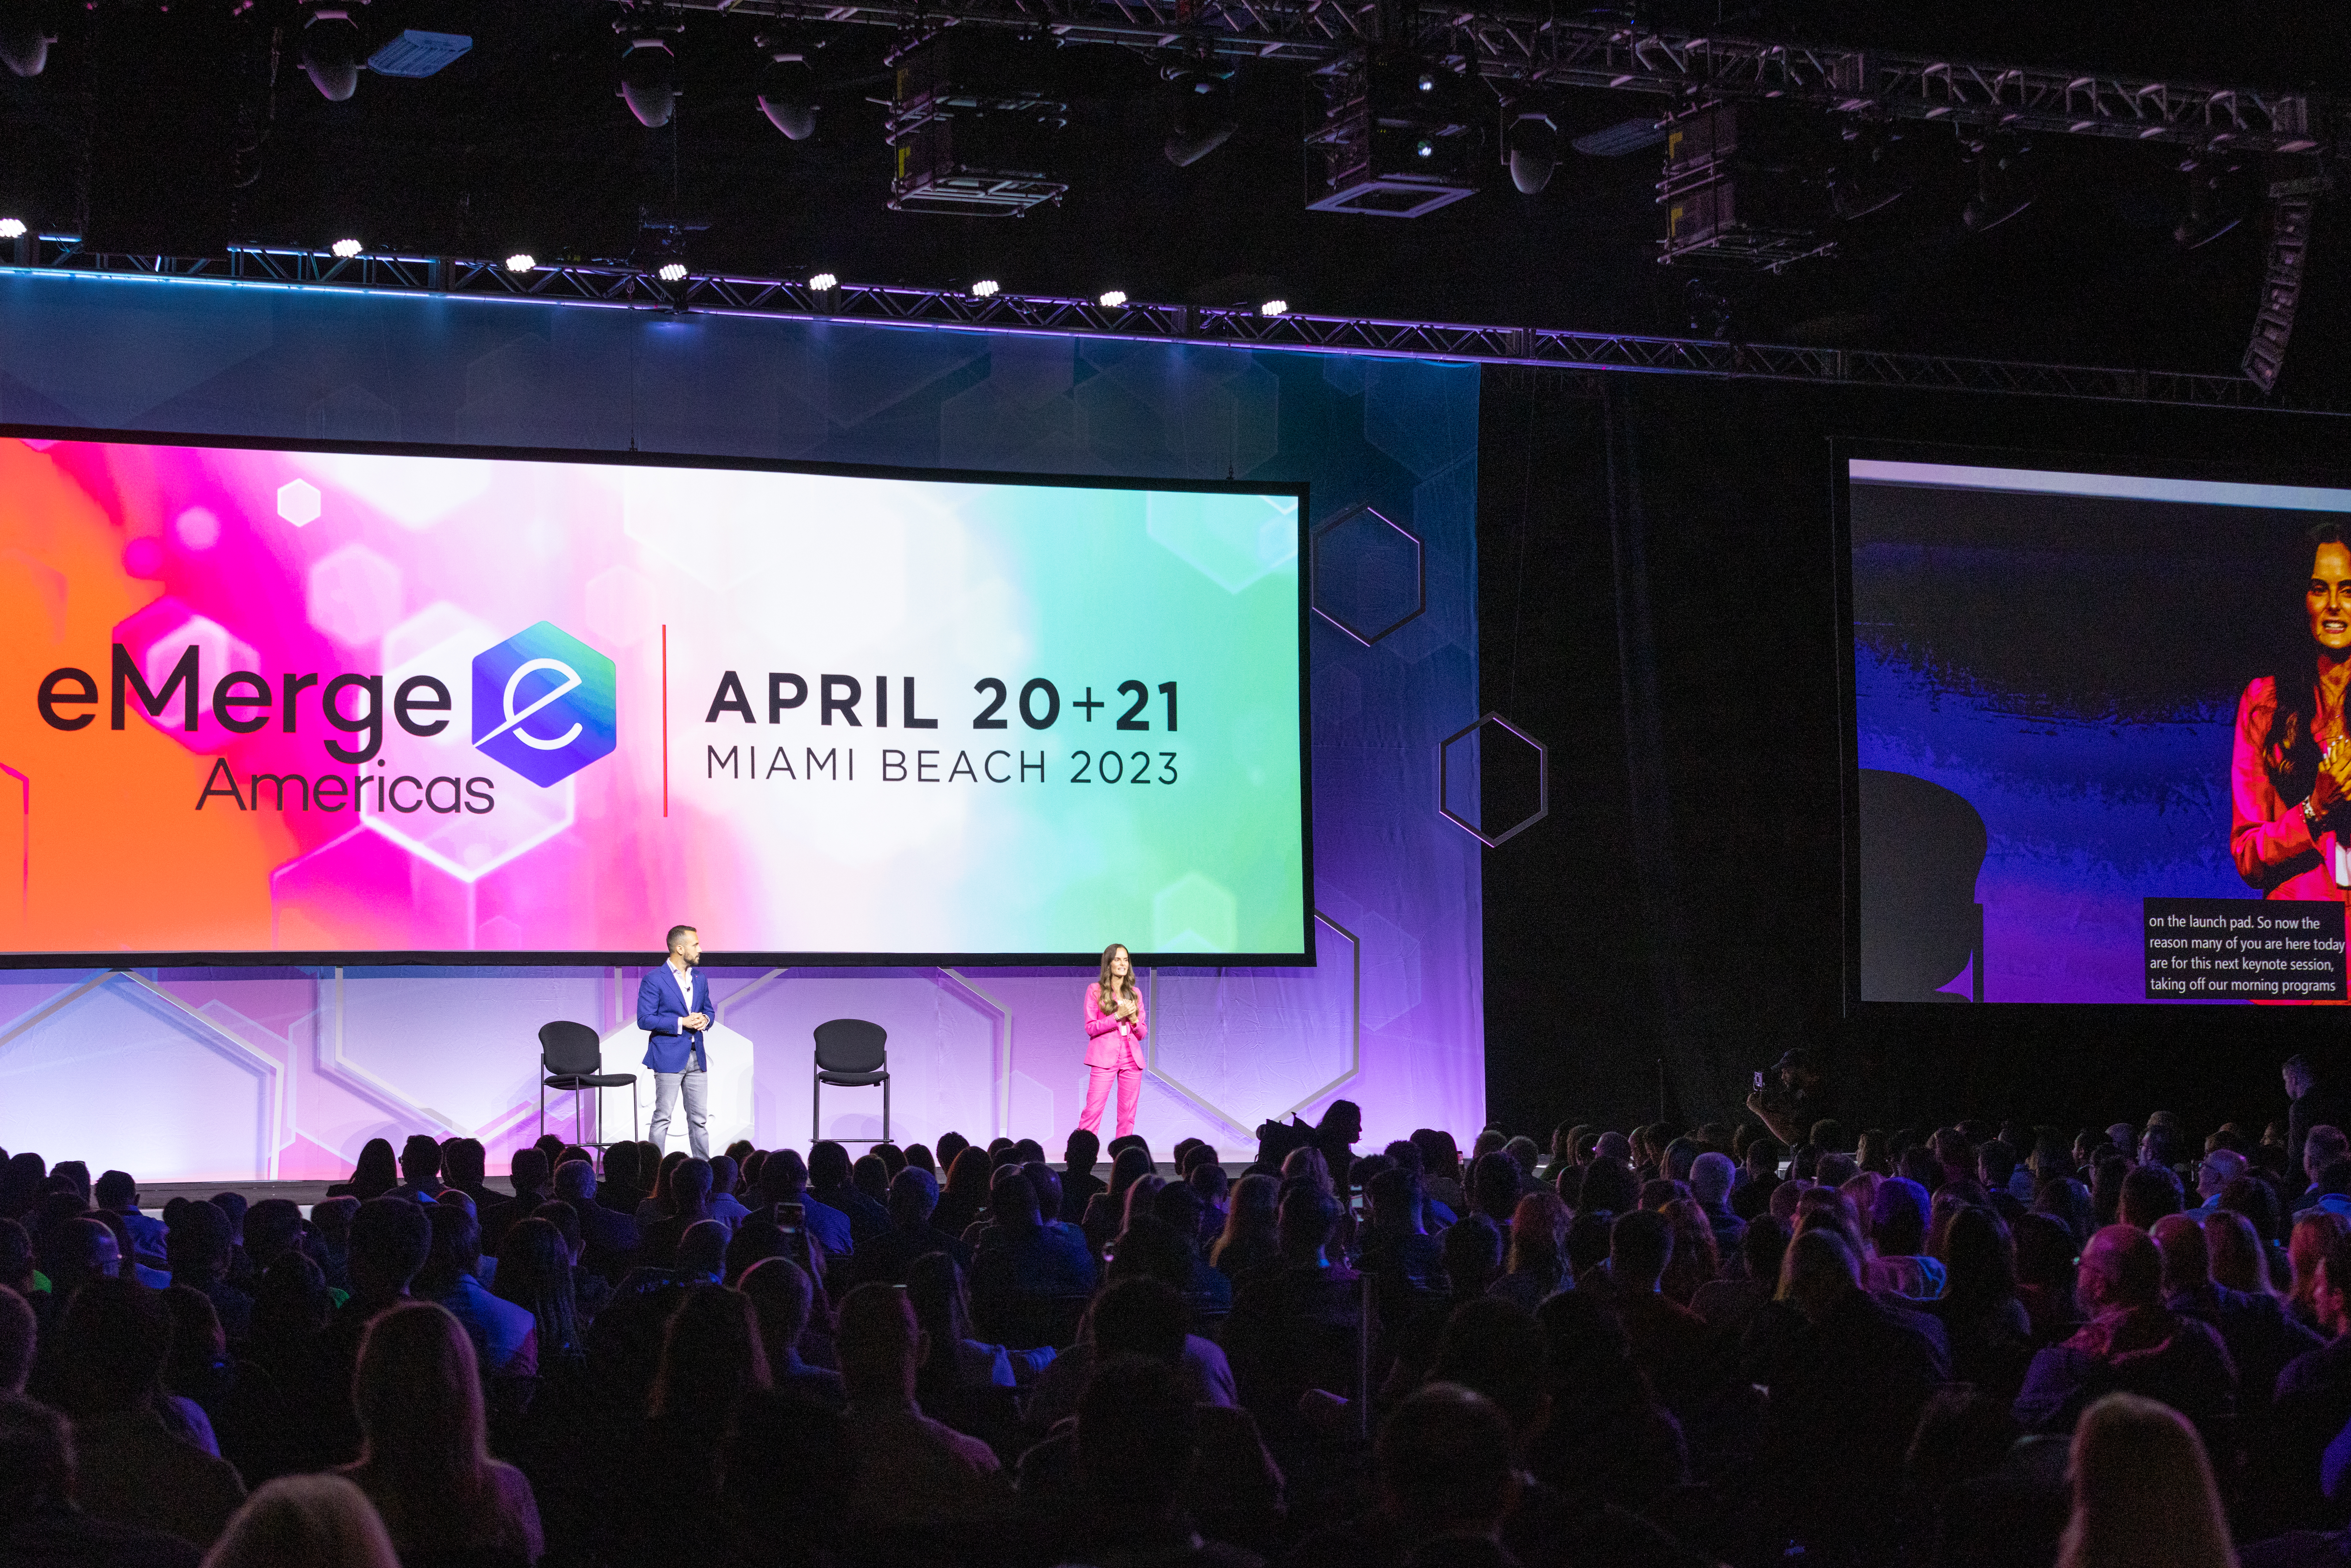 Two speakers onstage in front of a large crowd at eMerge Americas 2023.